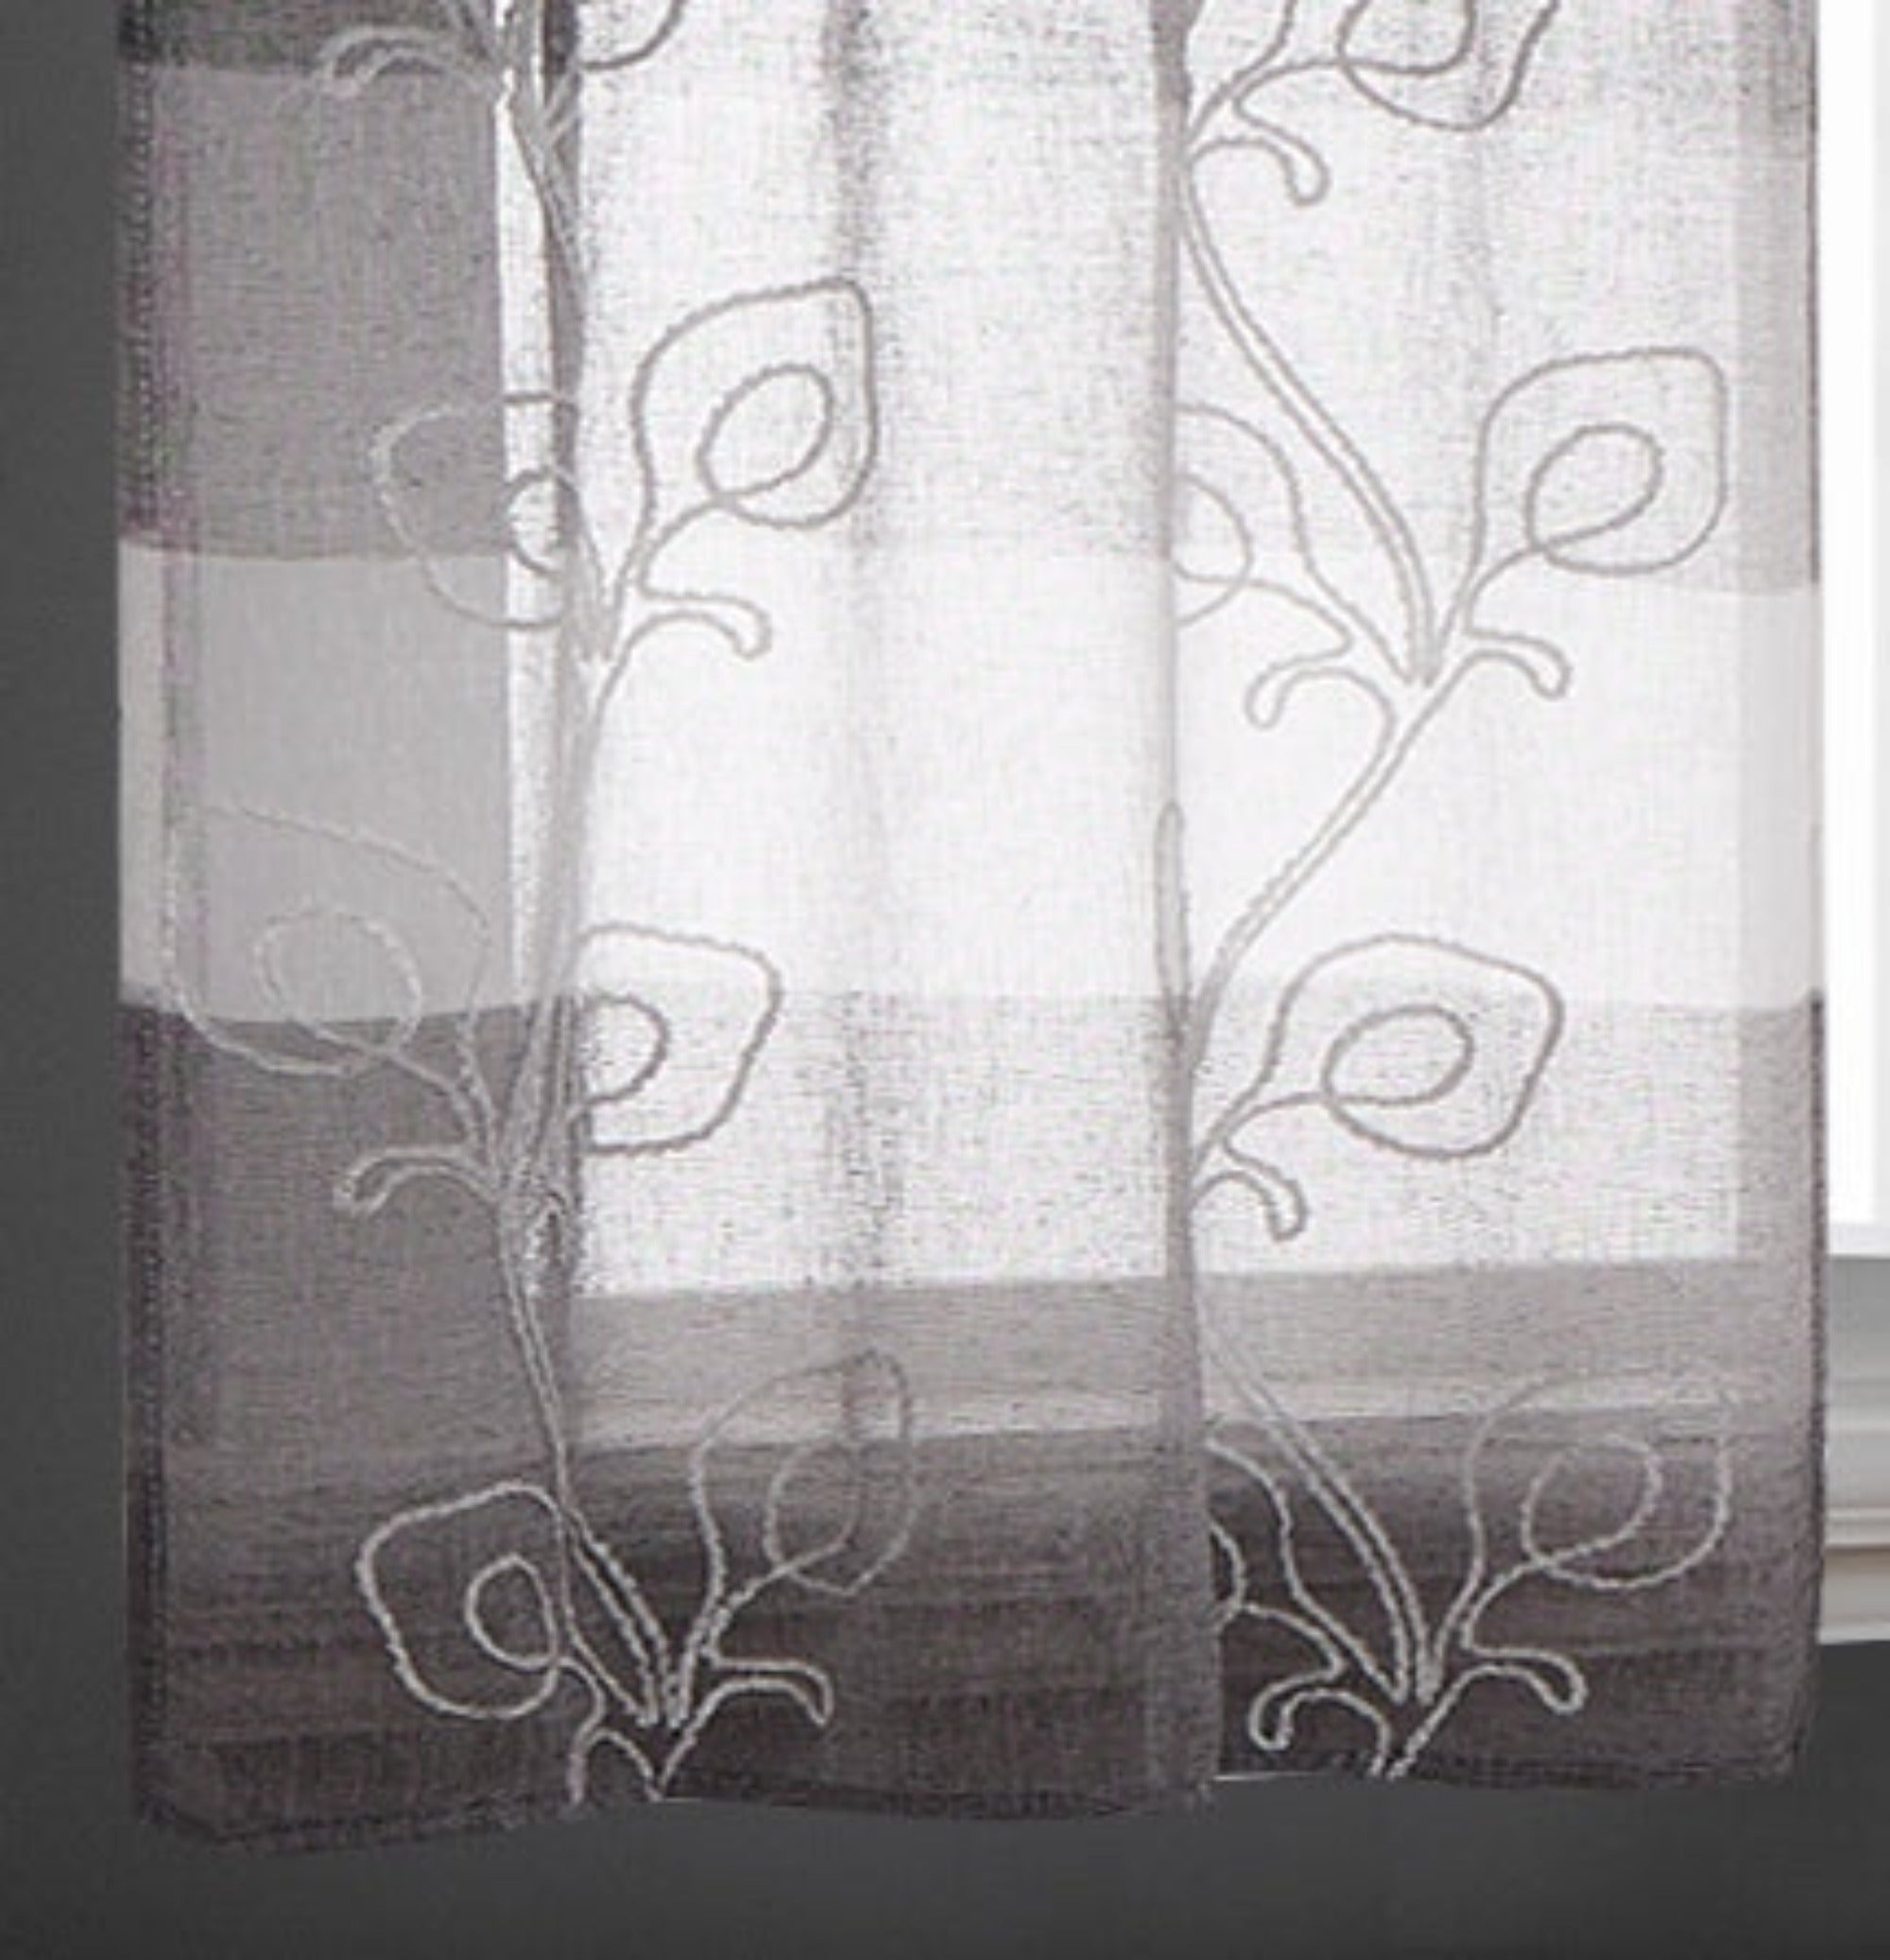 Dainty Home Silvia Boho Linen Look Striped Ombre Fabric With 3D Floral Chenille Embroidery Kitchen Curtain Set, 1 Valance 52 x 18 and 2 Tiers 26 x 36